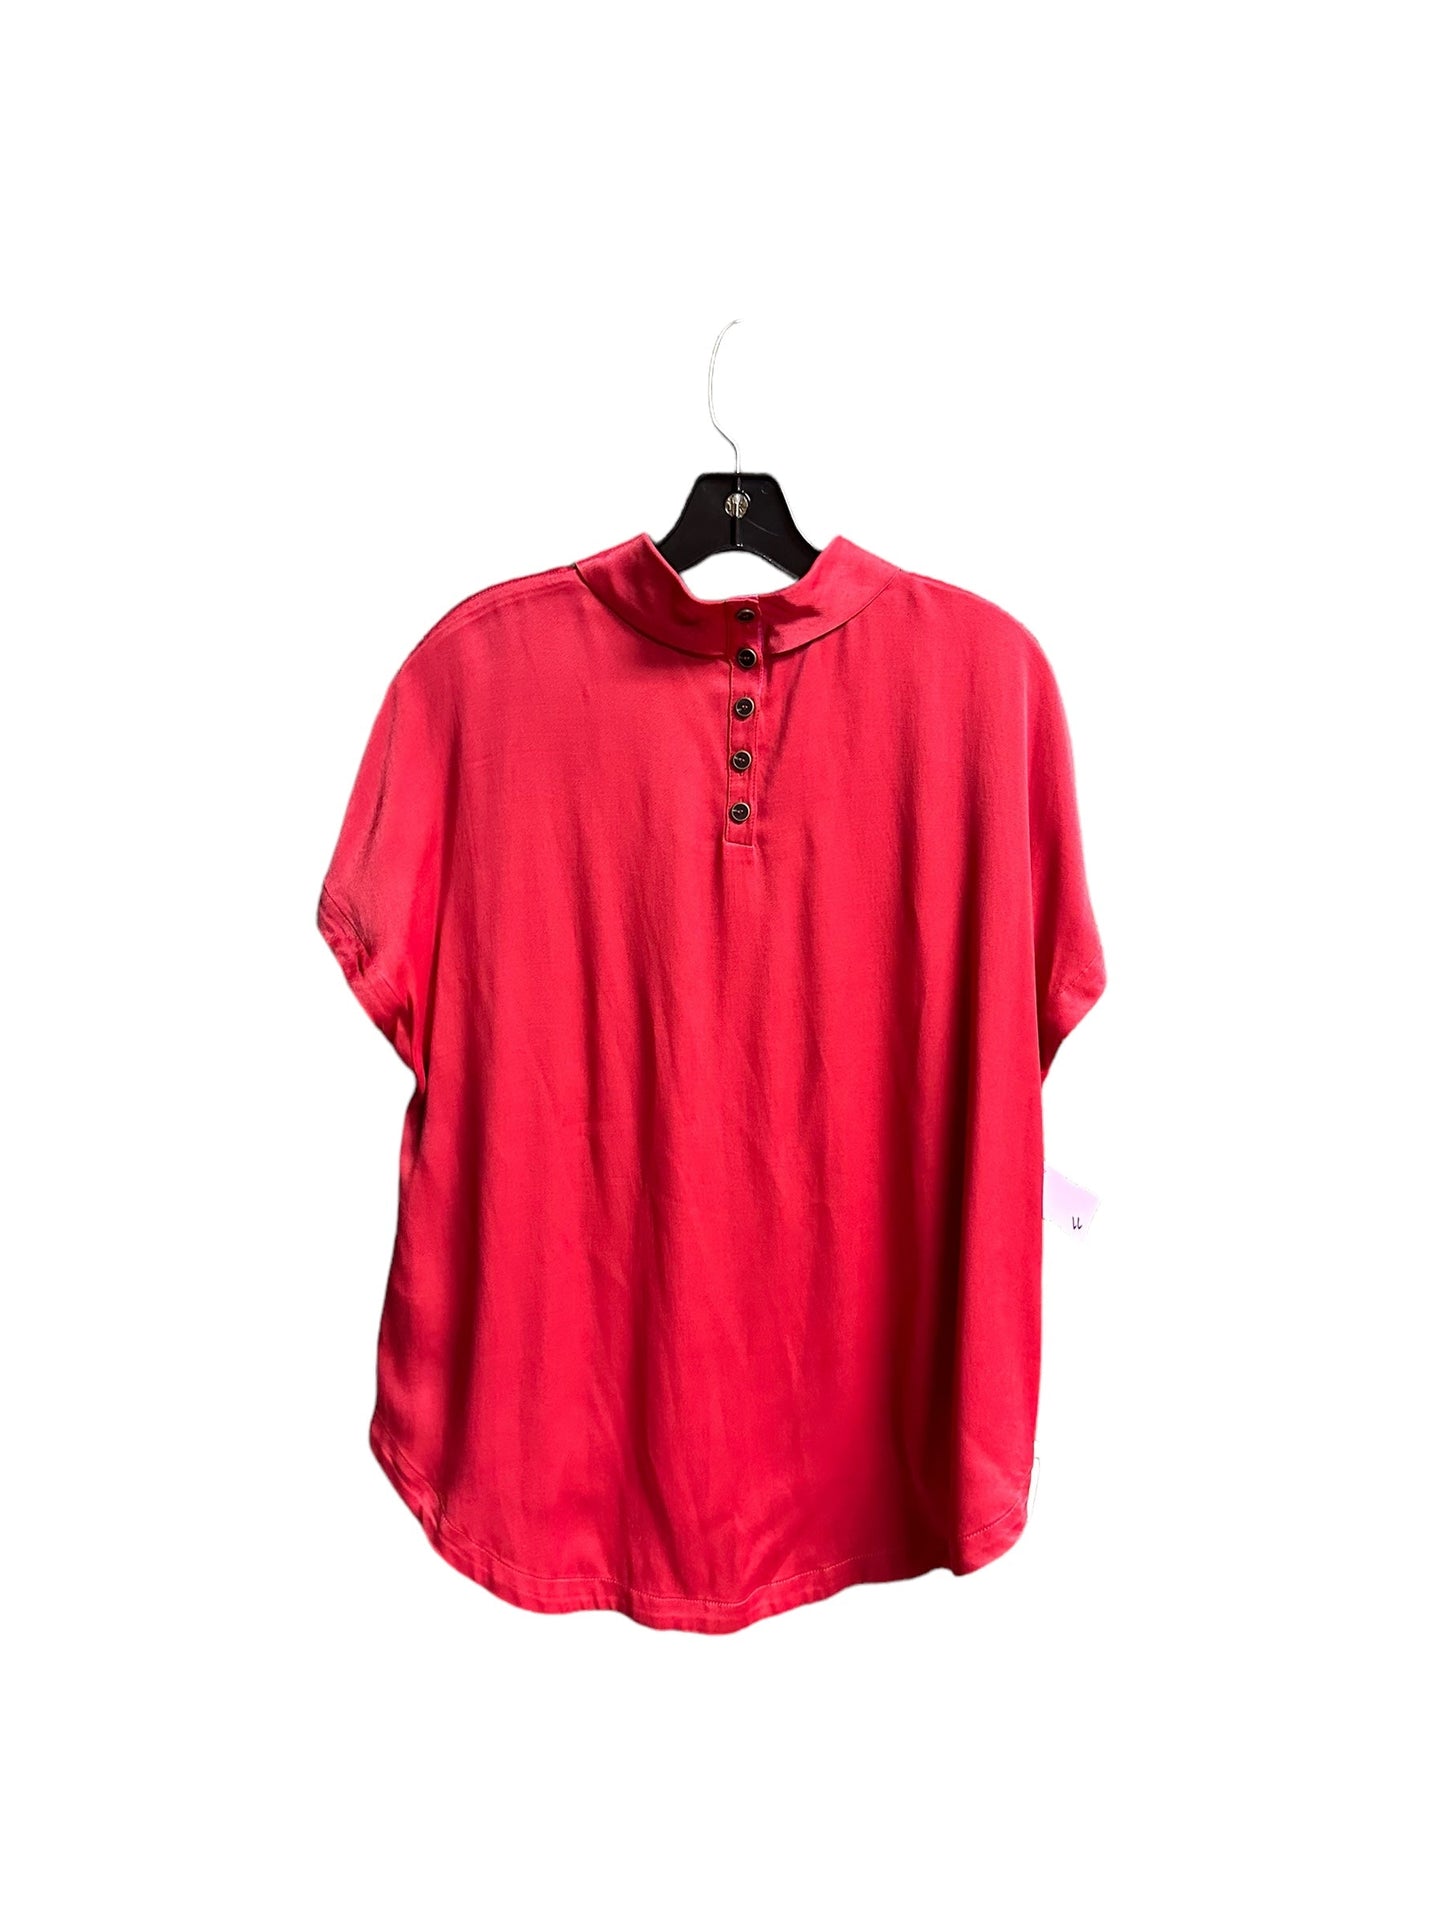 Red Top Short Sleeve Maeve, Size L